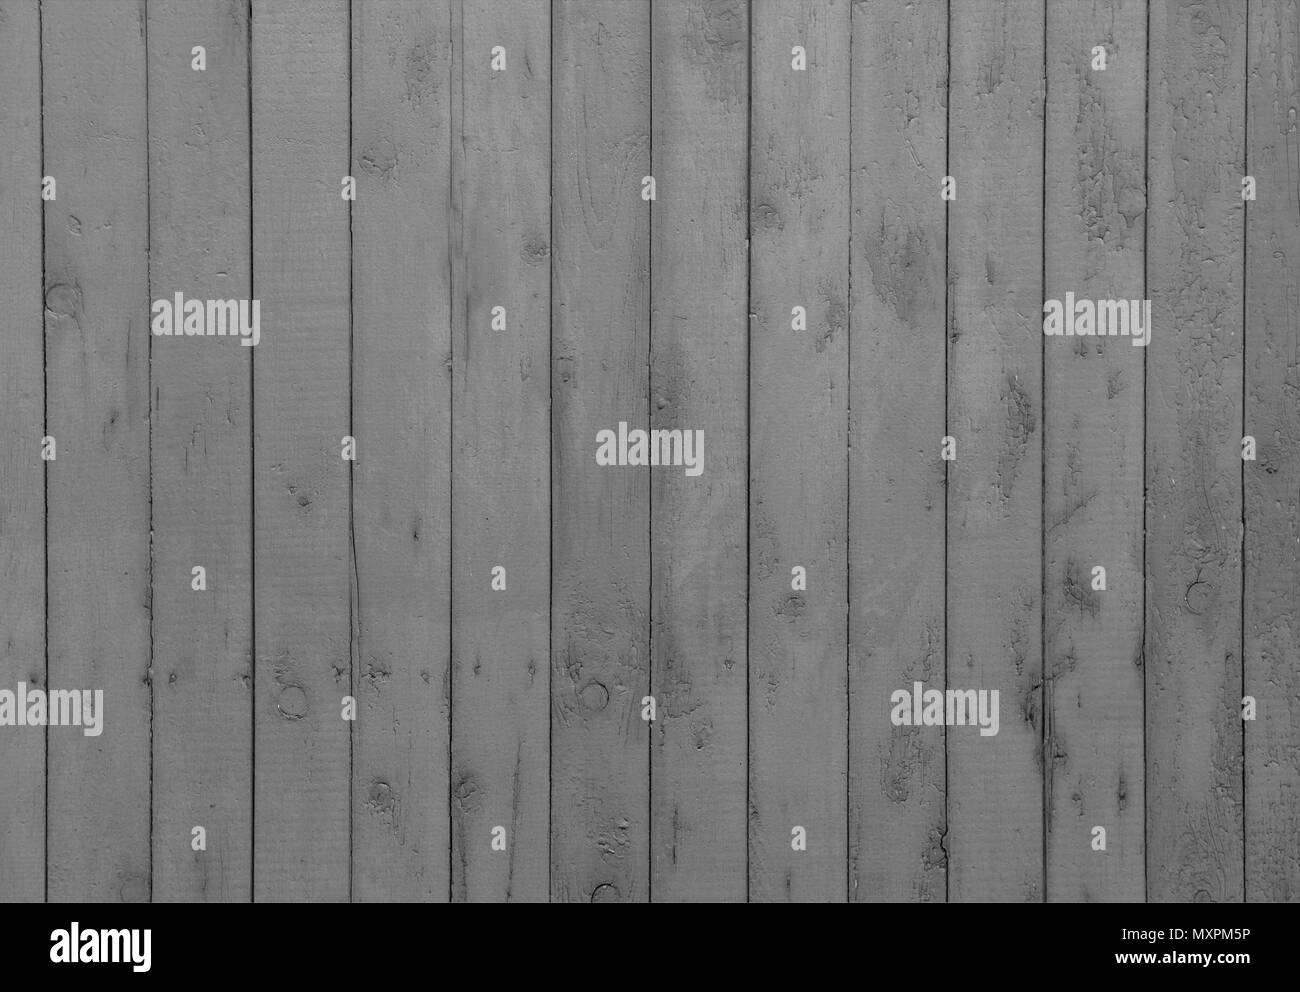 Wooden wall with vertical planks. Close up of an old wooden fence panels Stock Photo